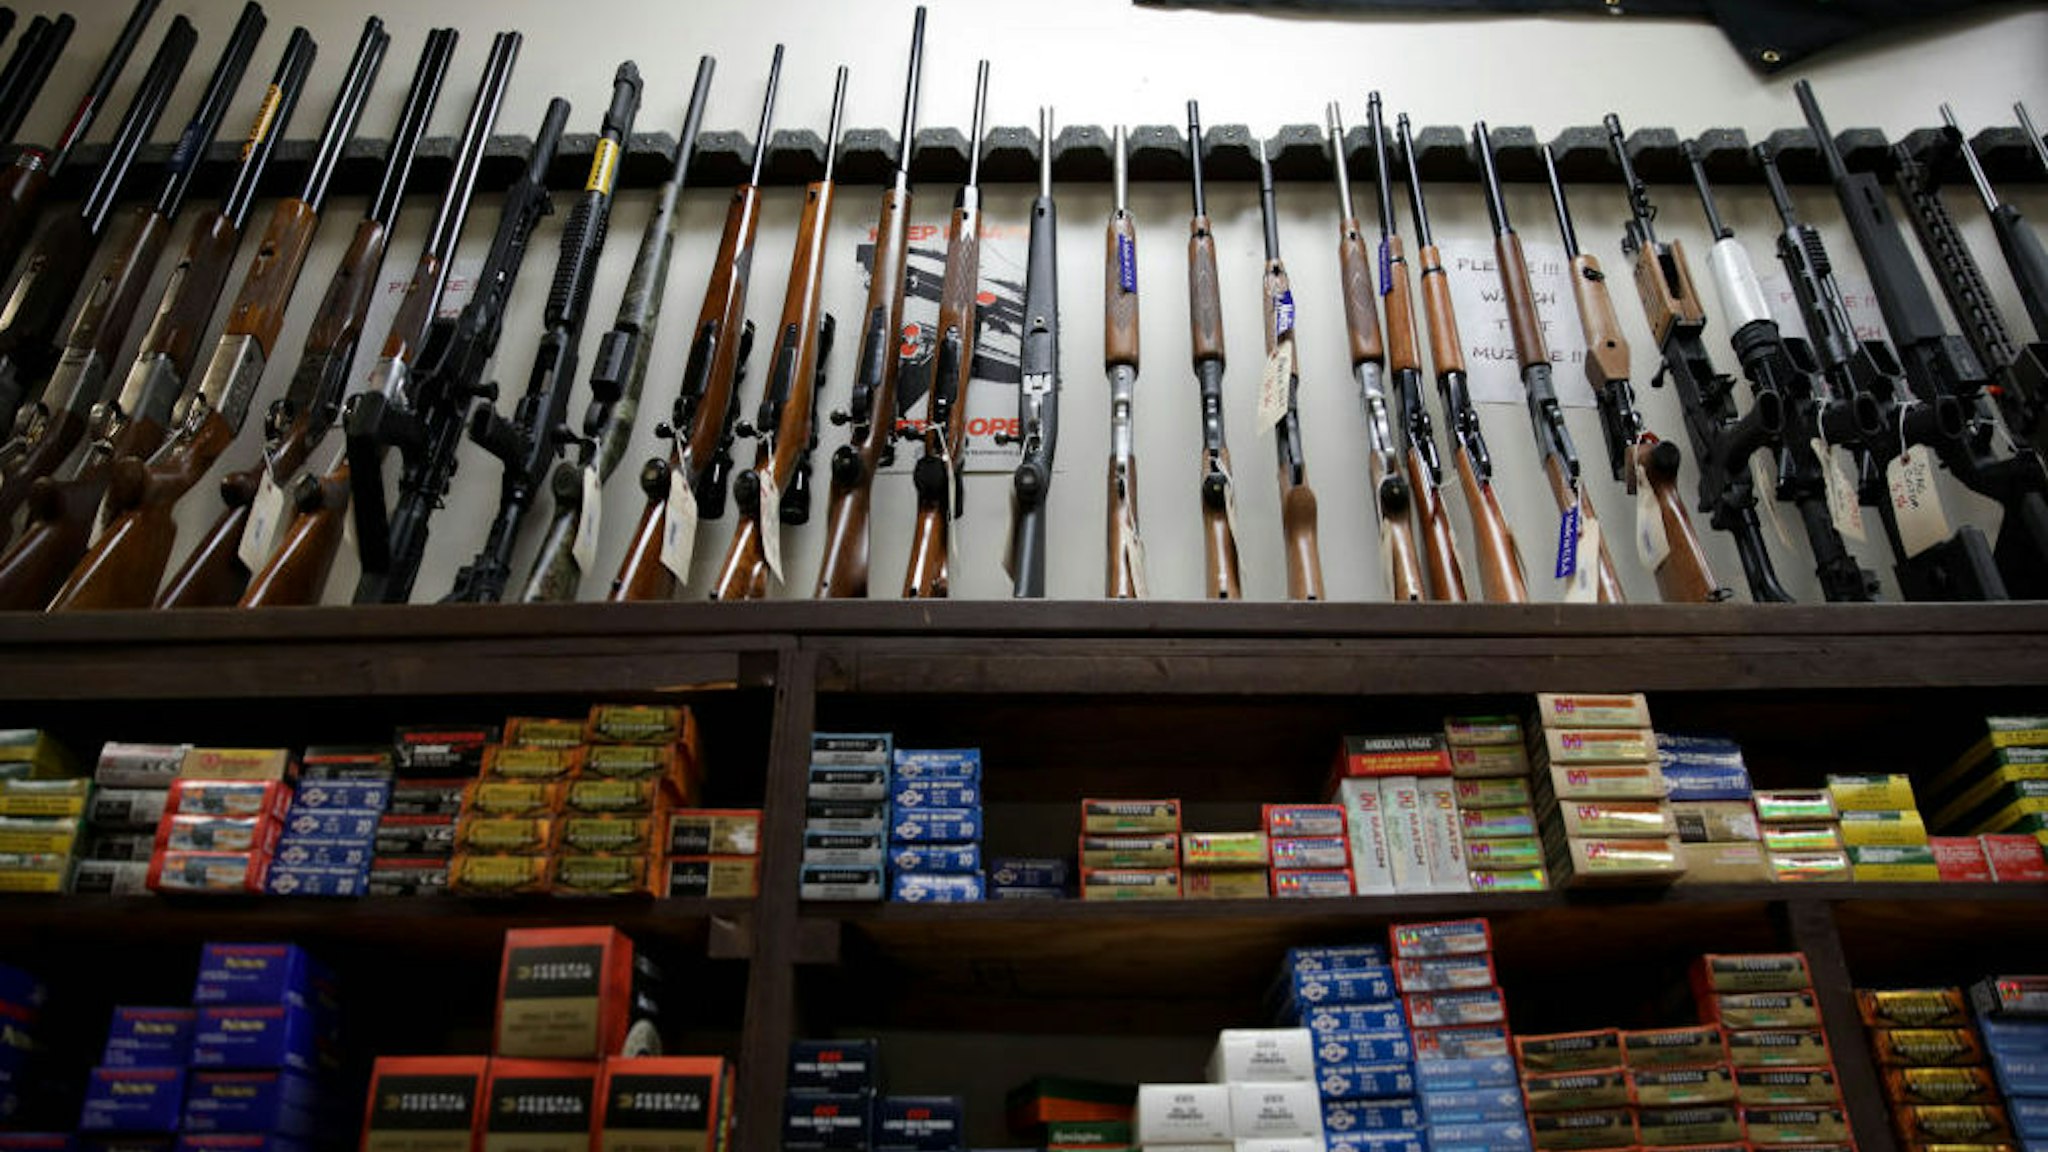 WASHINGTON, USA - MARCH 17: Weapons on display at a gun shop in Washington, DC, United States as gun and ammunition sales in the U.S. have skyrocketed as the coronavirus (COVID-19) pandemic spread across the country.